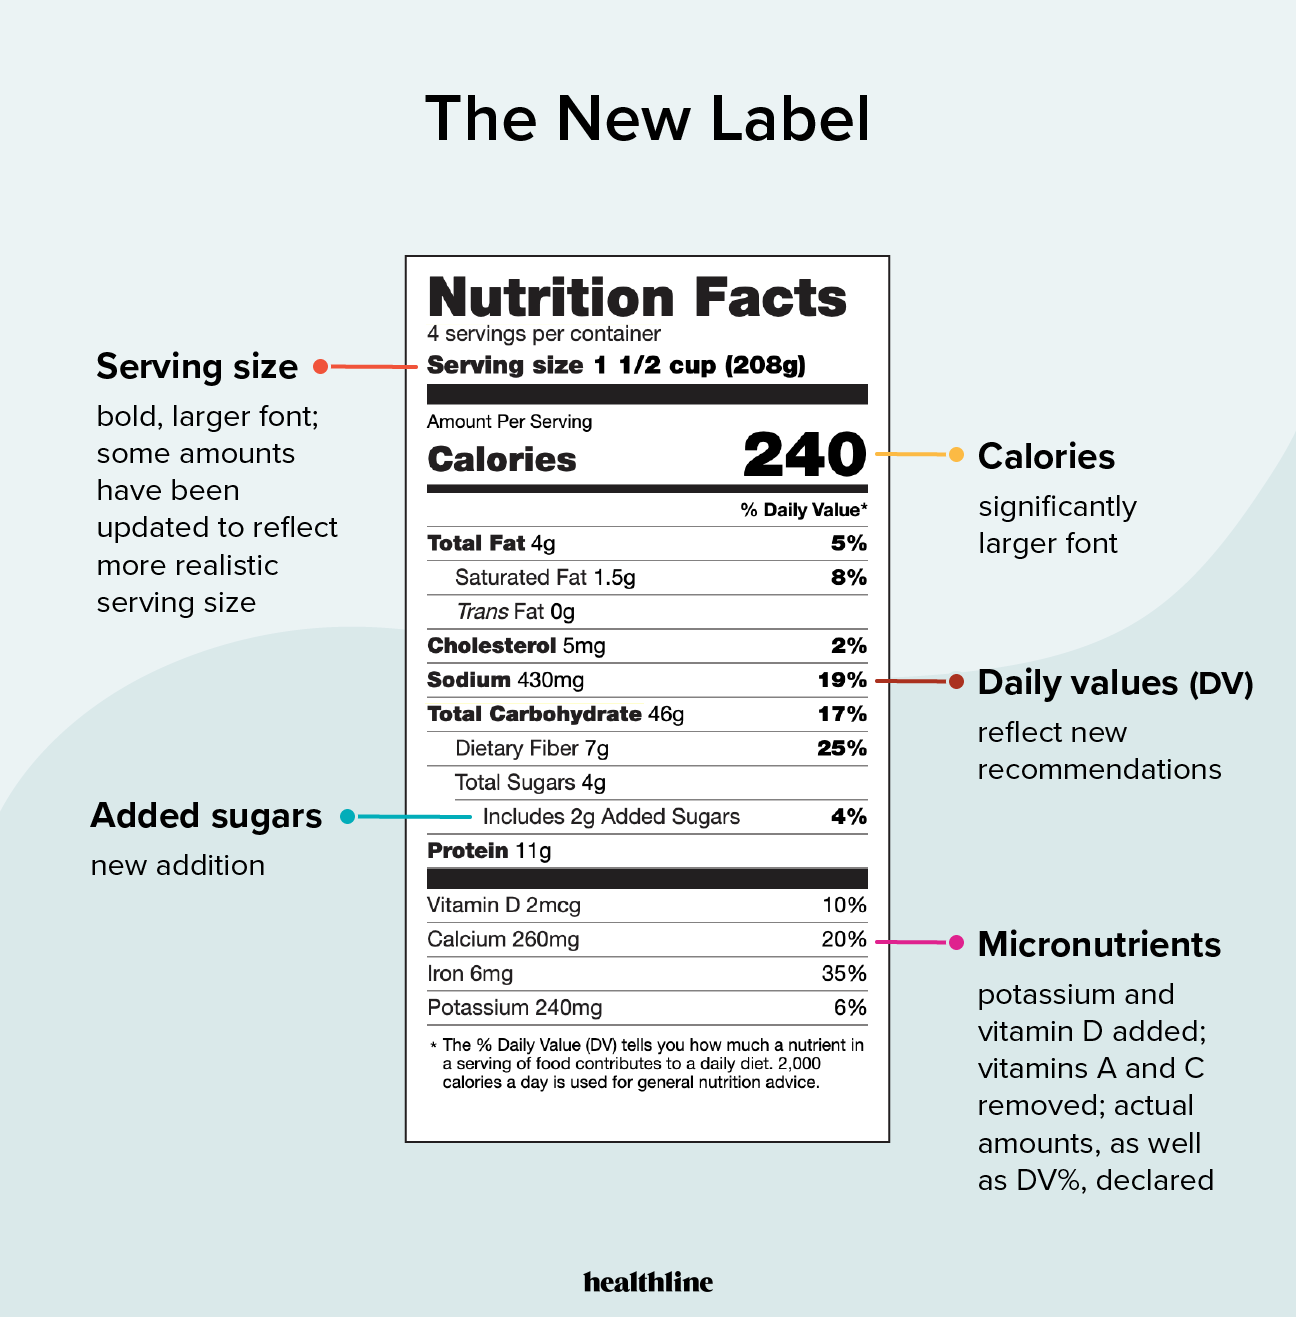 618648 All You Need To Know About The New Nutrition Facts Label 1296x1255 Body 